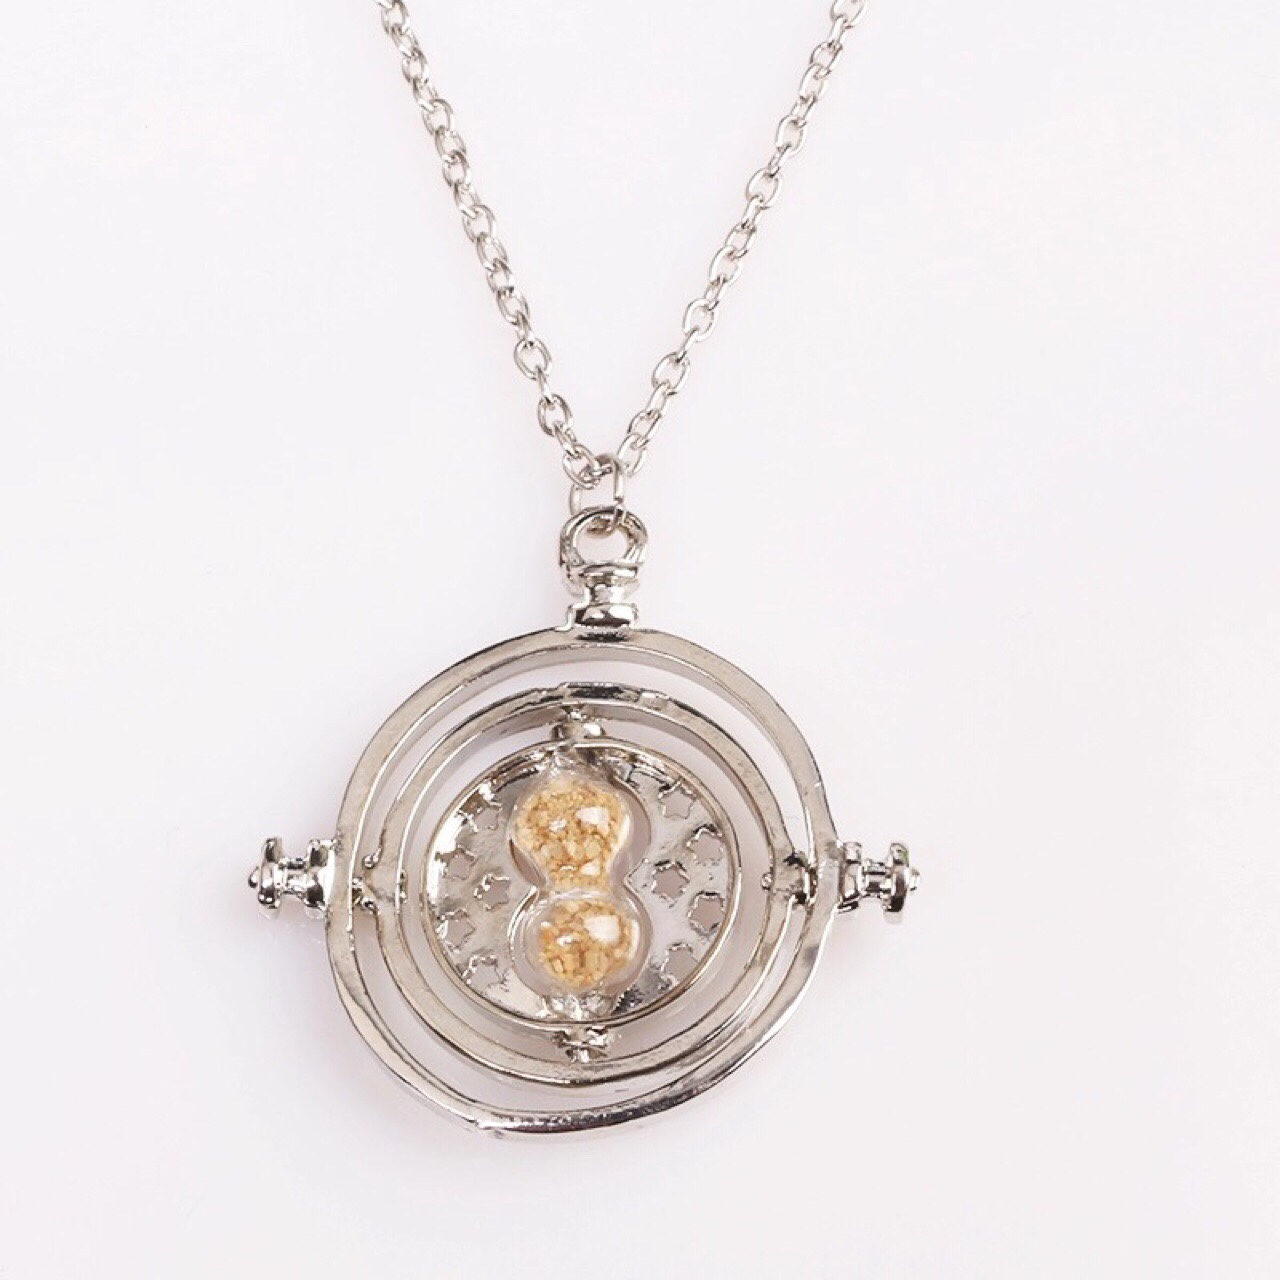 Small Silver Hermione's Harry Potter Time Turner Rotating Hourglass Necklace